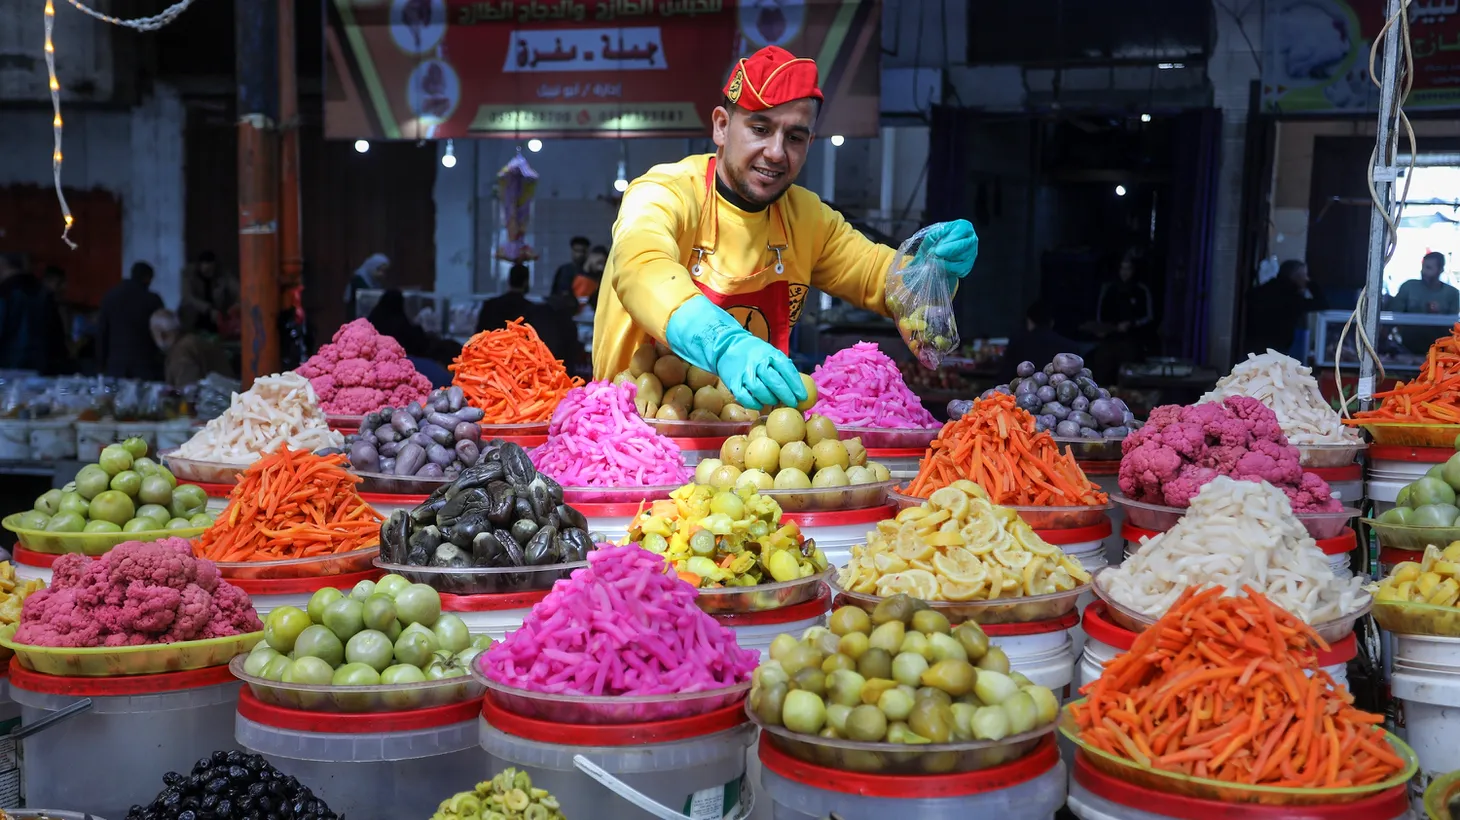 At a market in the city of Rafah, in the southern Gaza Strip, people shop for food ahead of Ramadan.